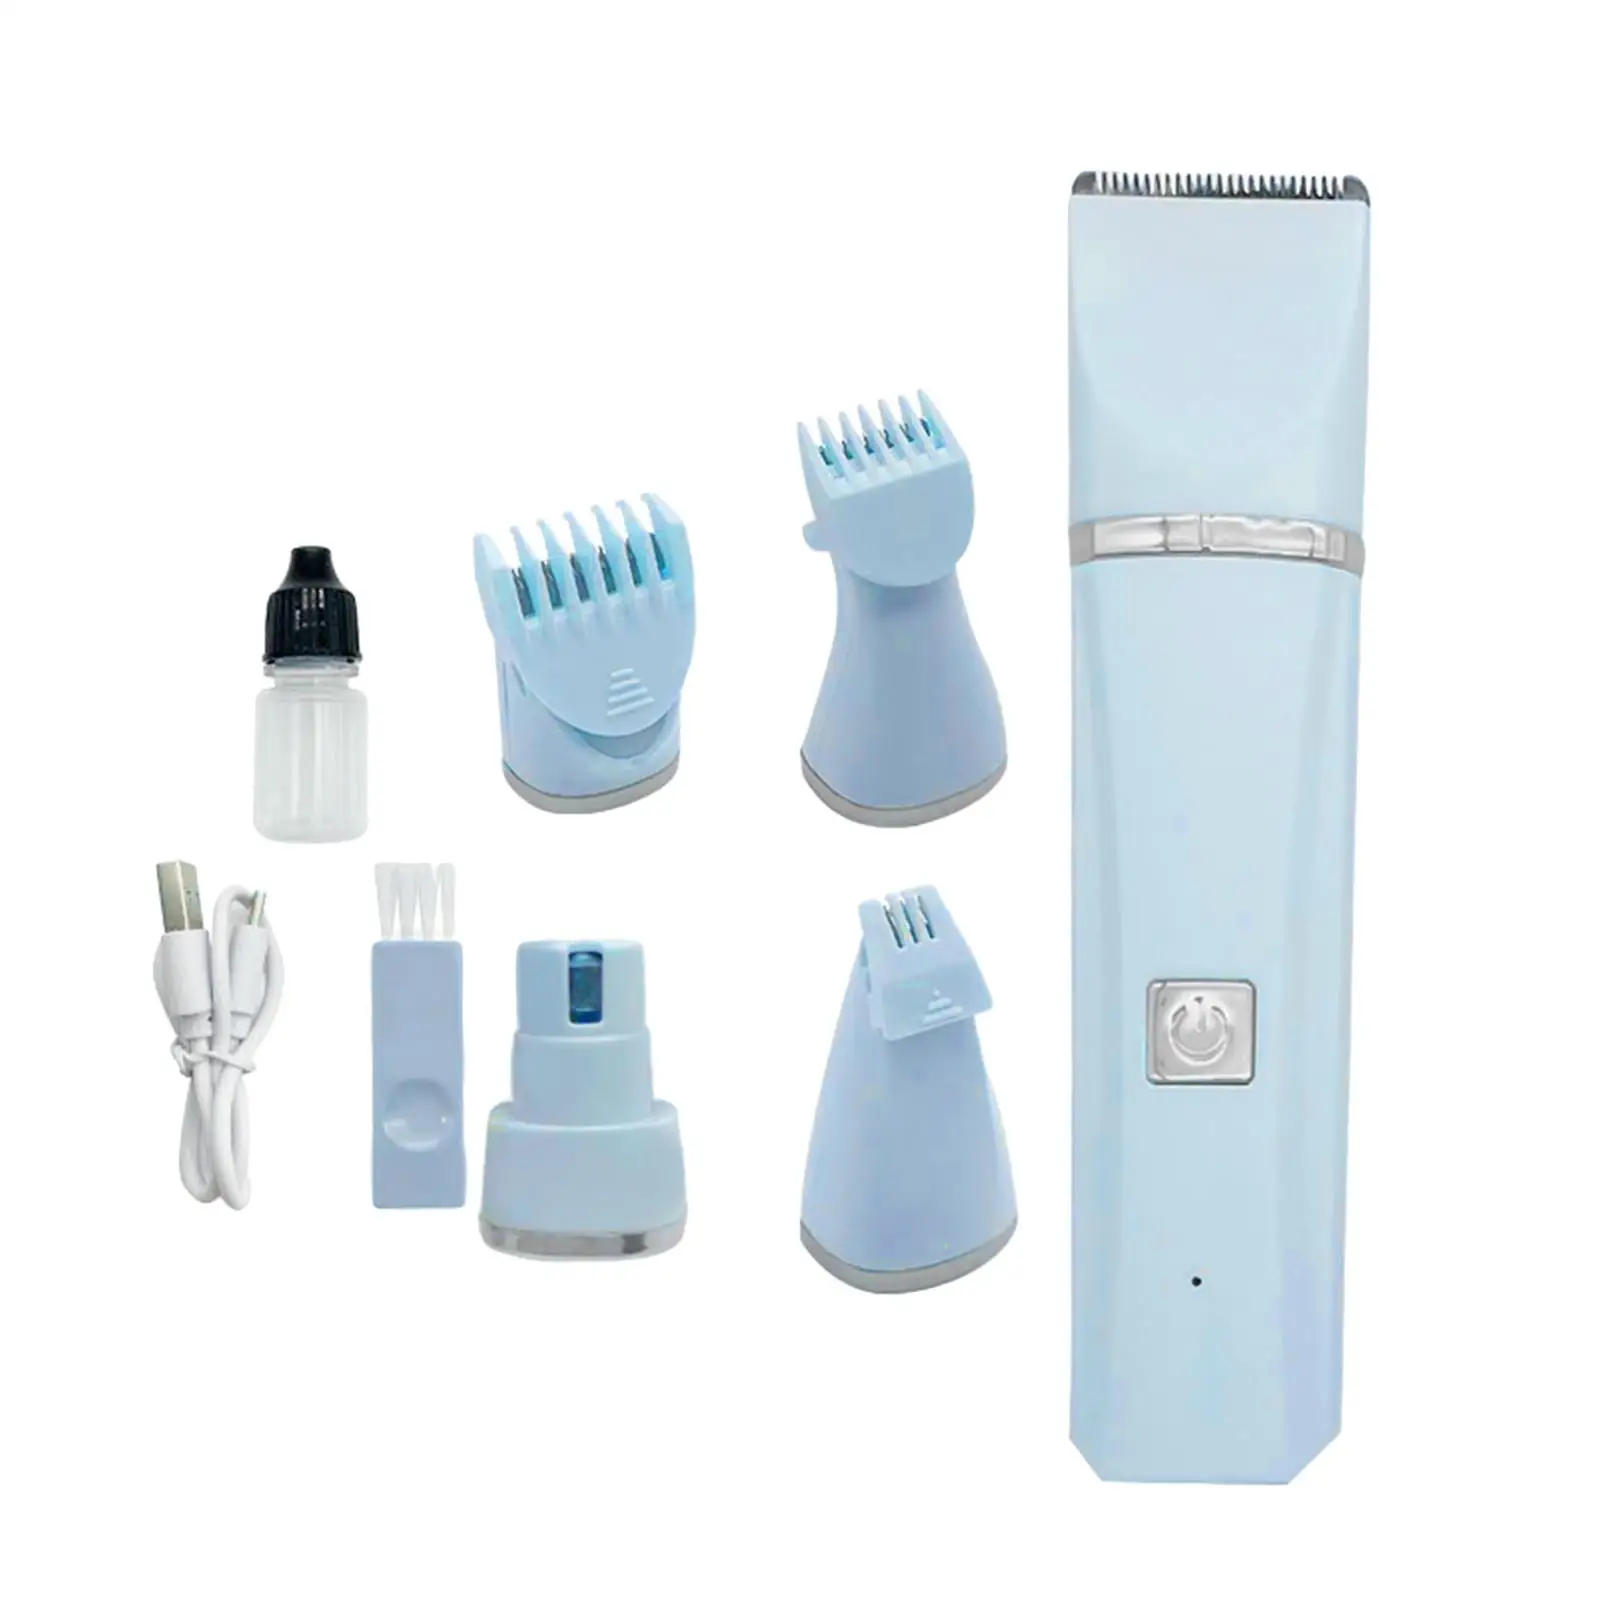 Dog Clippers, Professional Dog Grooming Clipper pets Grooming Kit with Grooming Combs Low Noise, Rechargeable